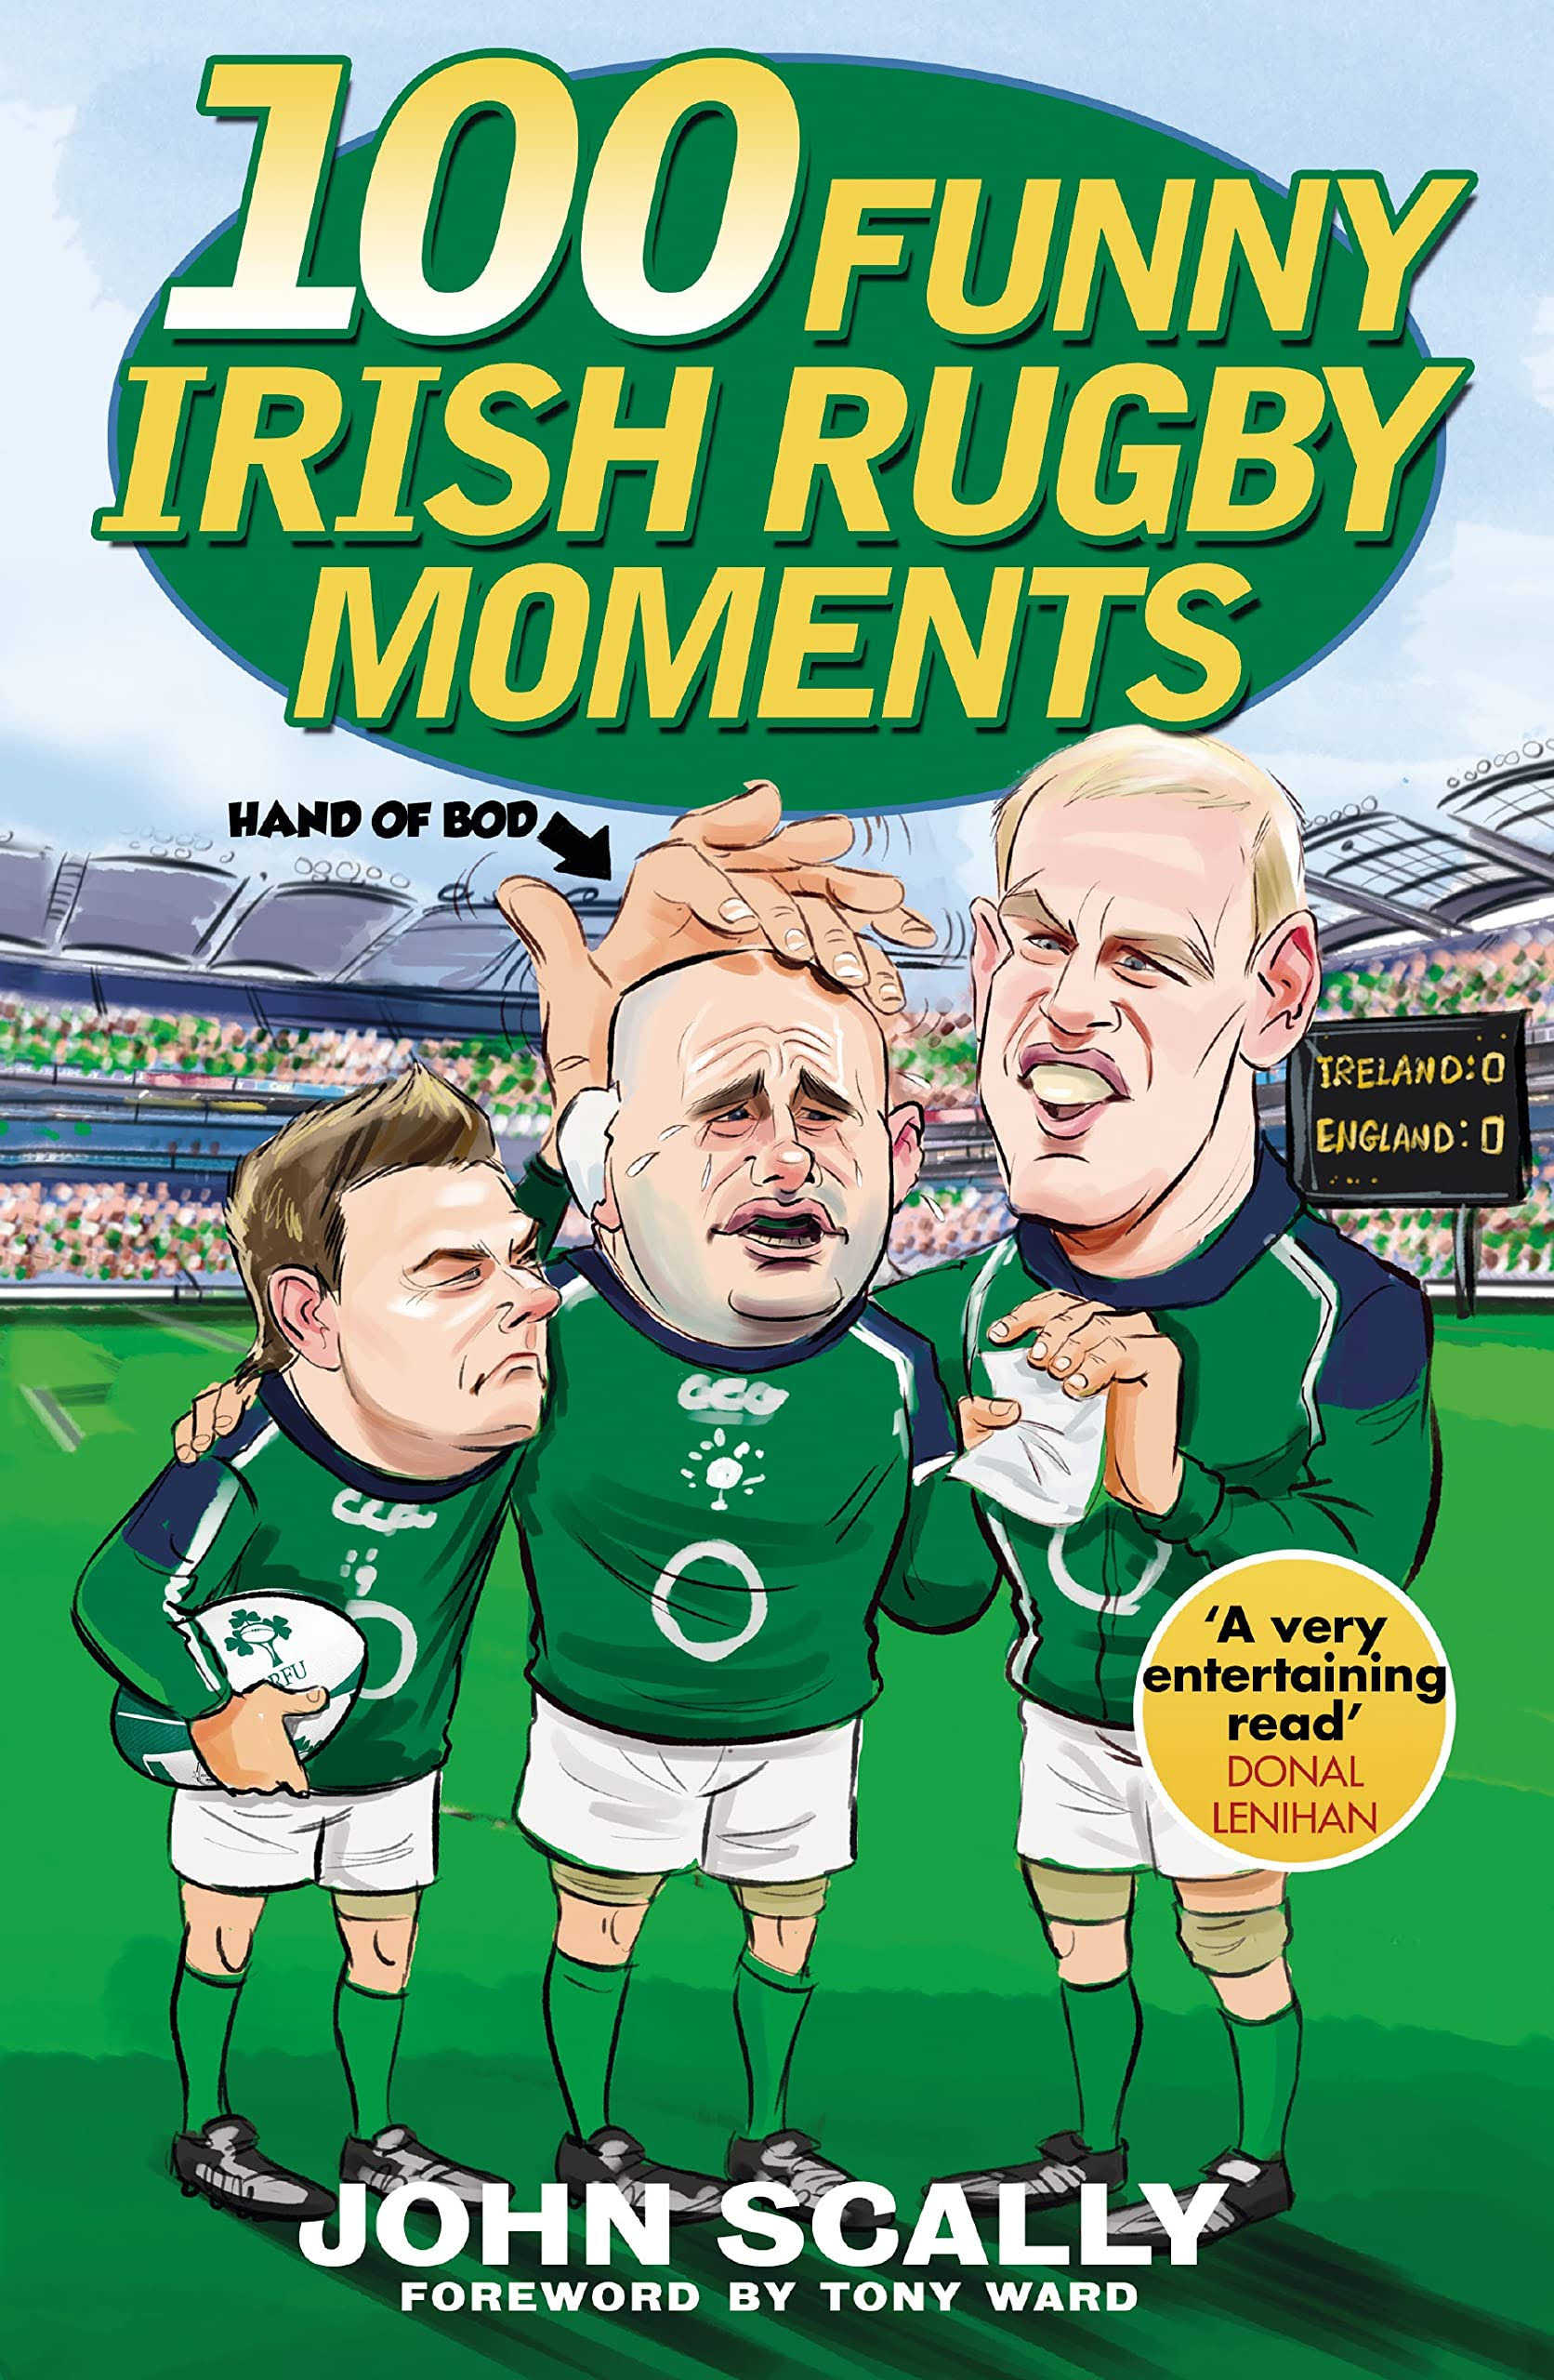 100 Funny Irish Rugby Moments [Book]